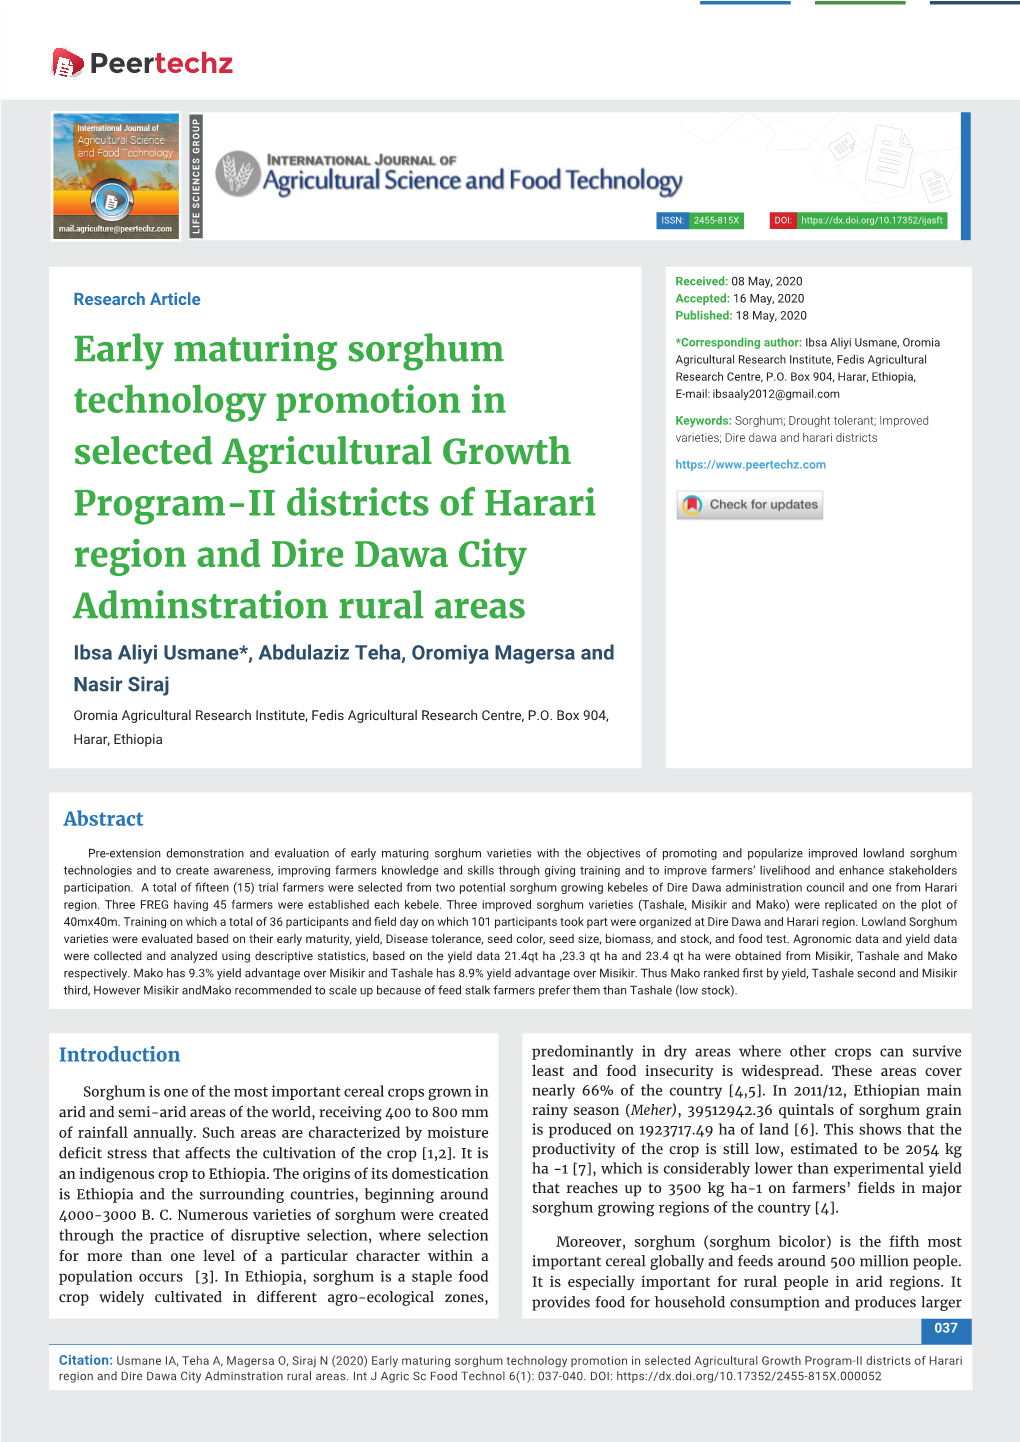 Early Maturing Sorghum Technology Promotion in Selected Agricultural Growth Program-II Districts of Harari Region and Dire Dawa City Adminstration Rural Areas